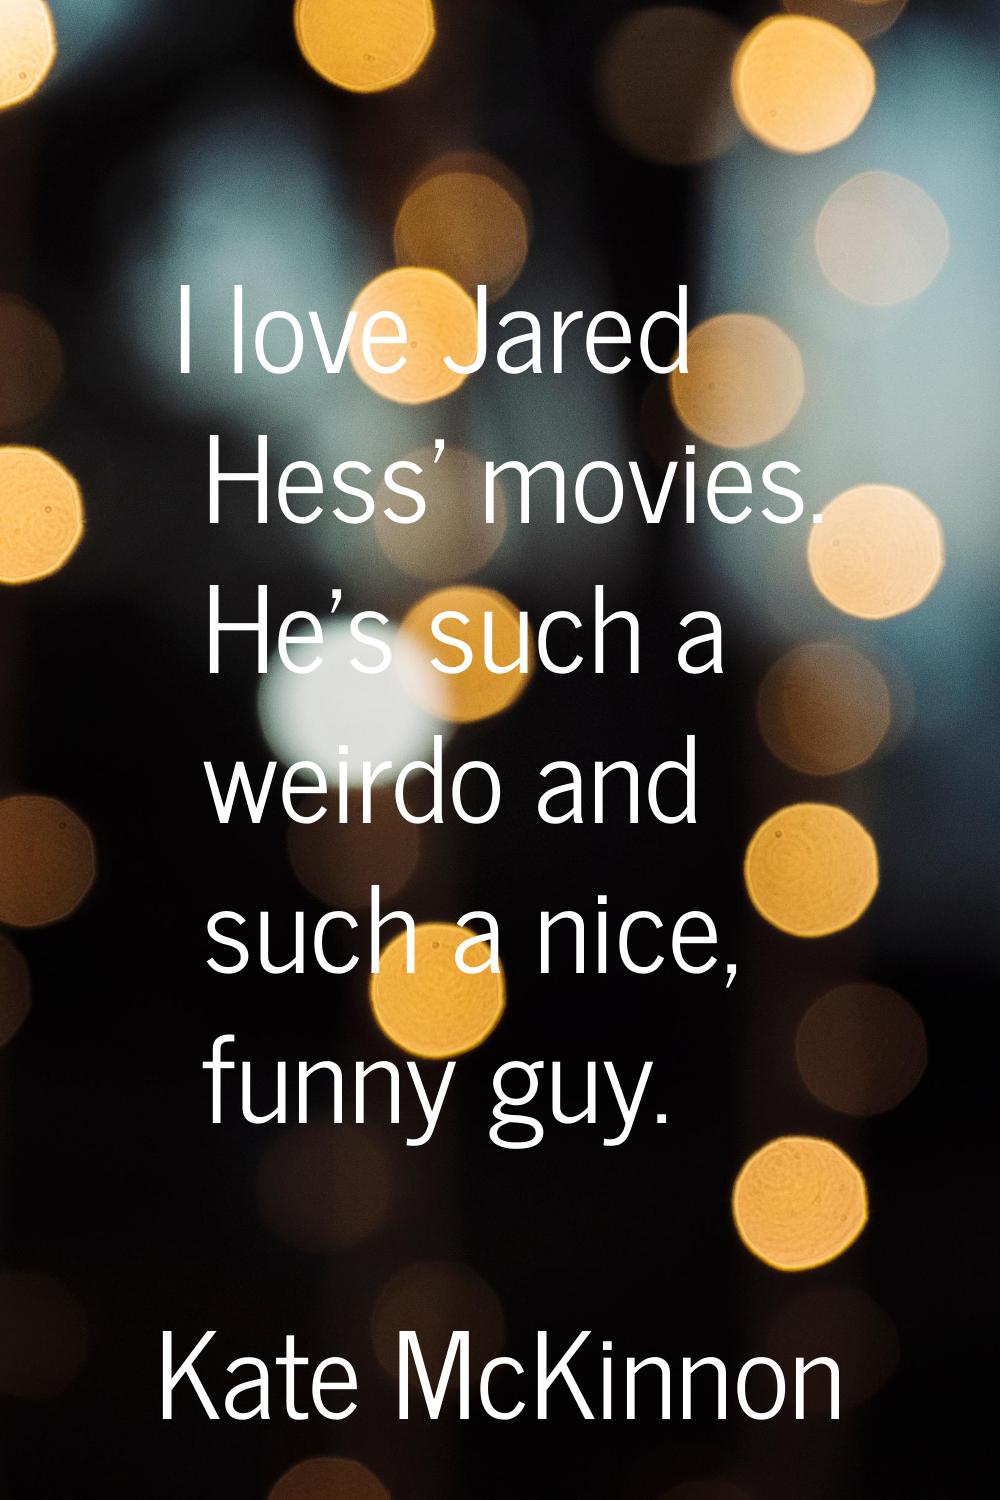 I love Jared Hess' movies. He's such a weirdo and such a nice, funny guy.